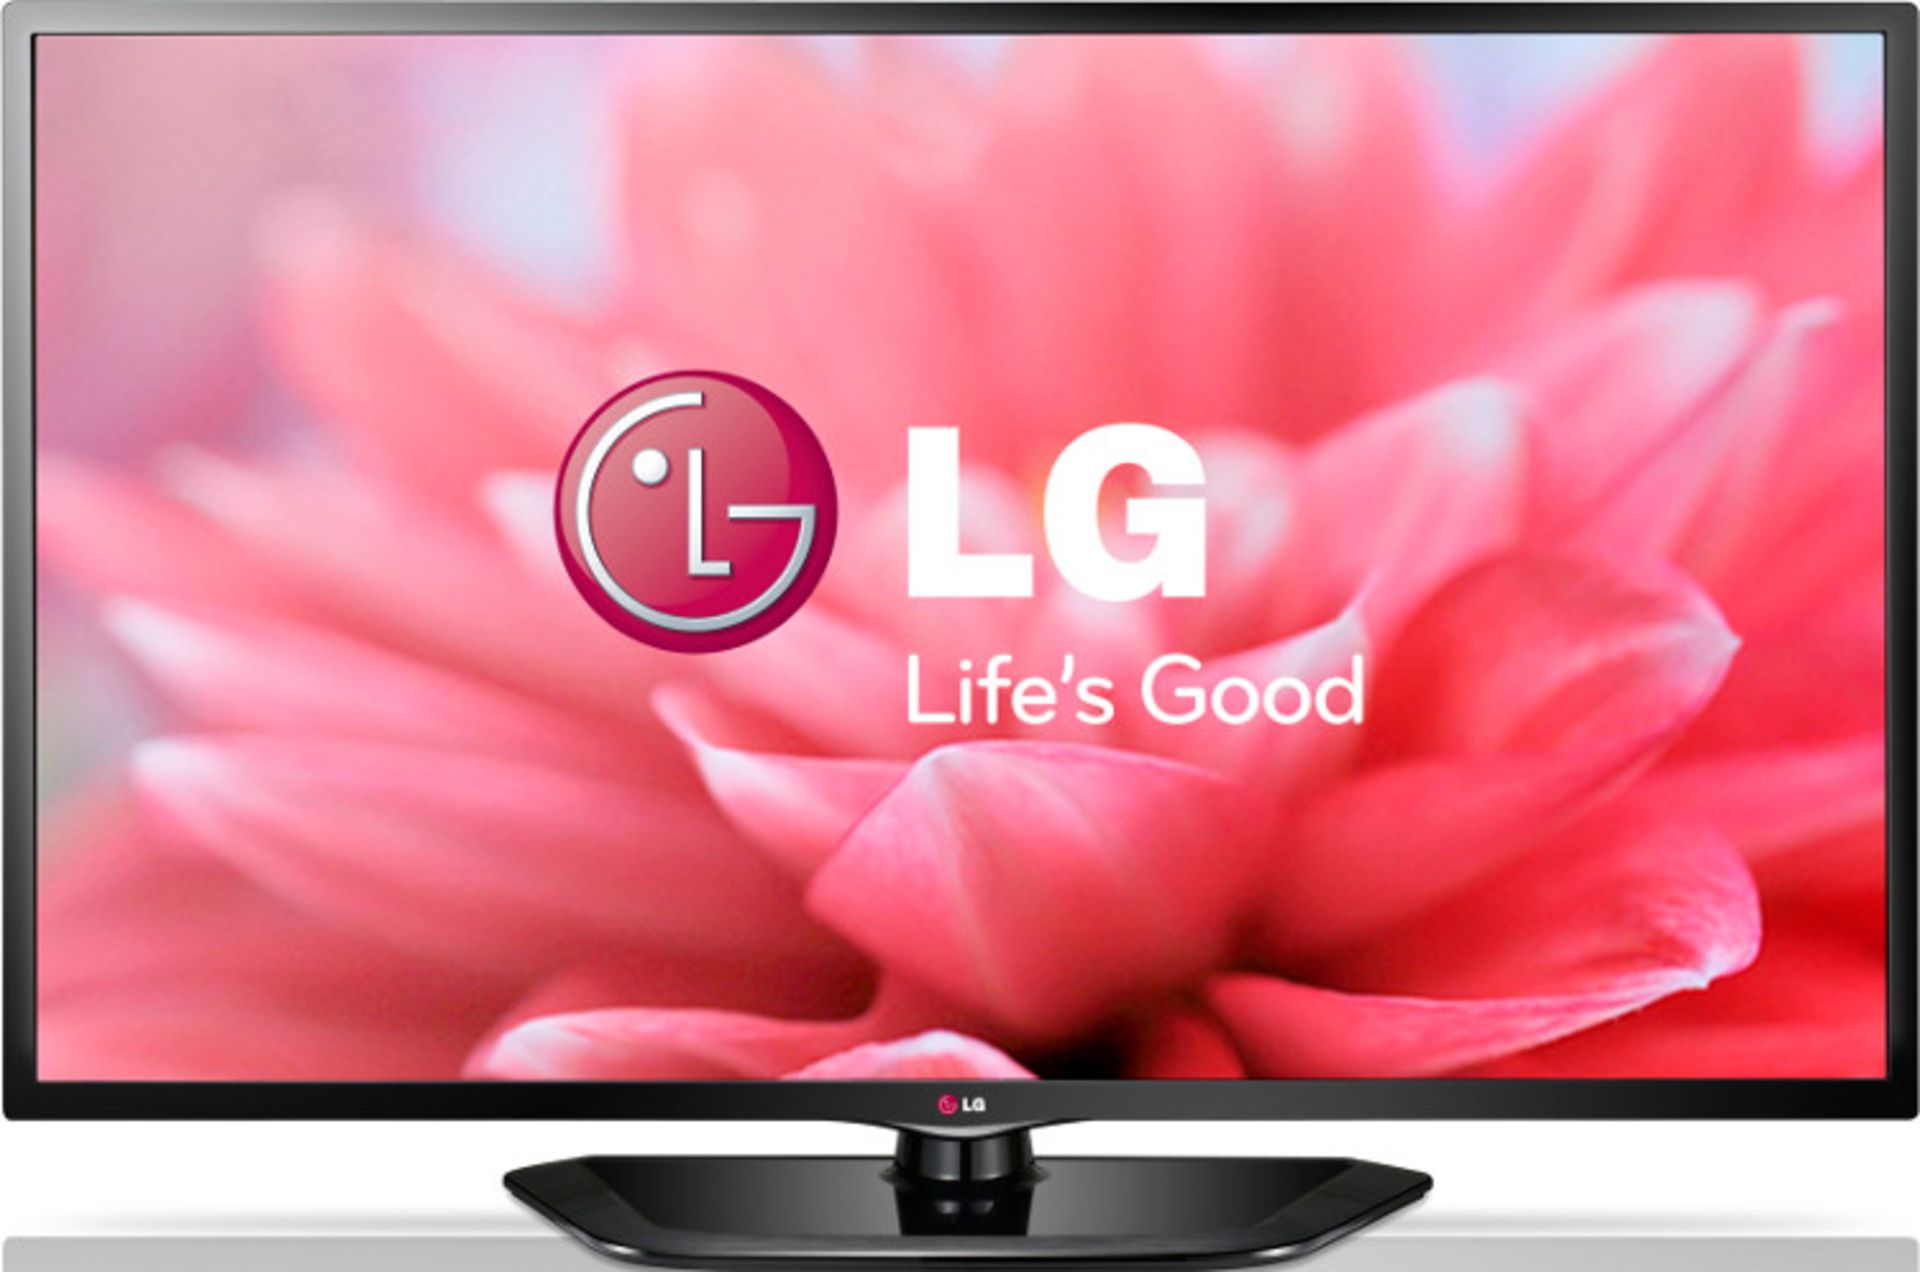 V Grade A 50" FULL HD LED TV WITH FREEVIEW HD 50LN540V